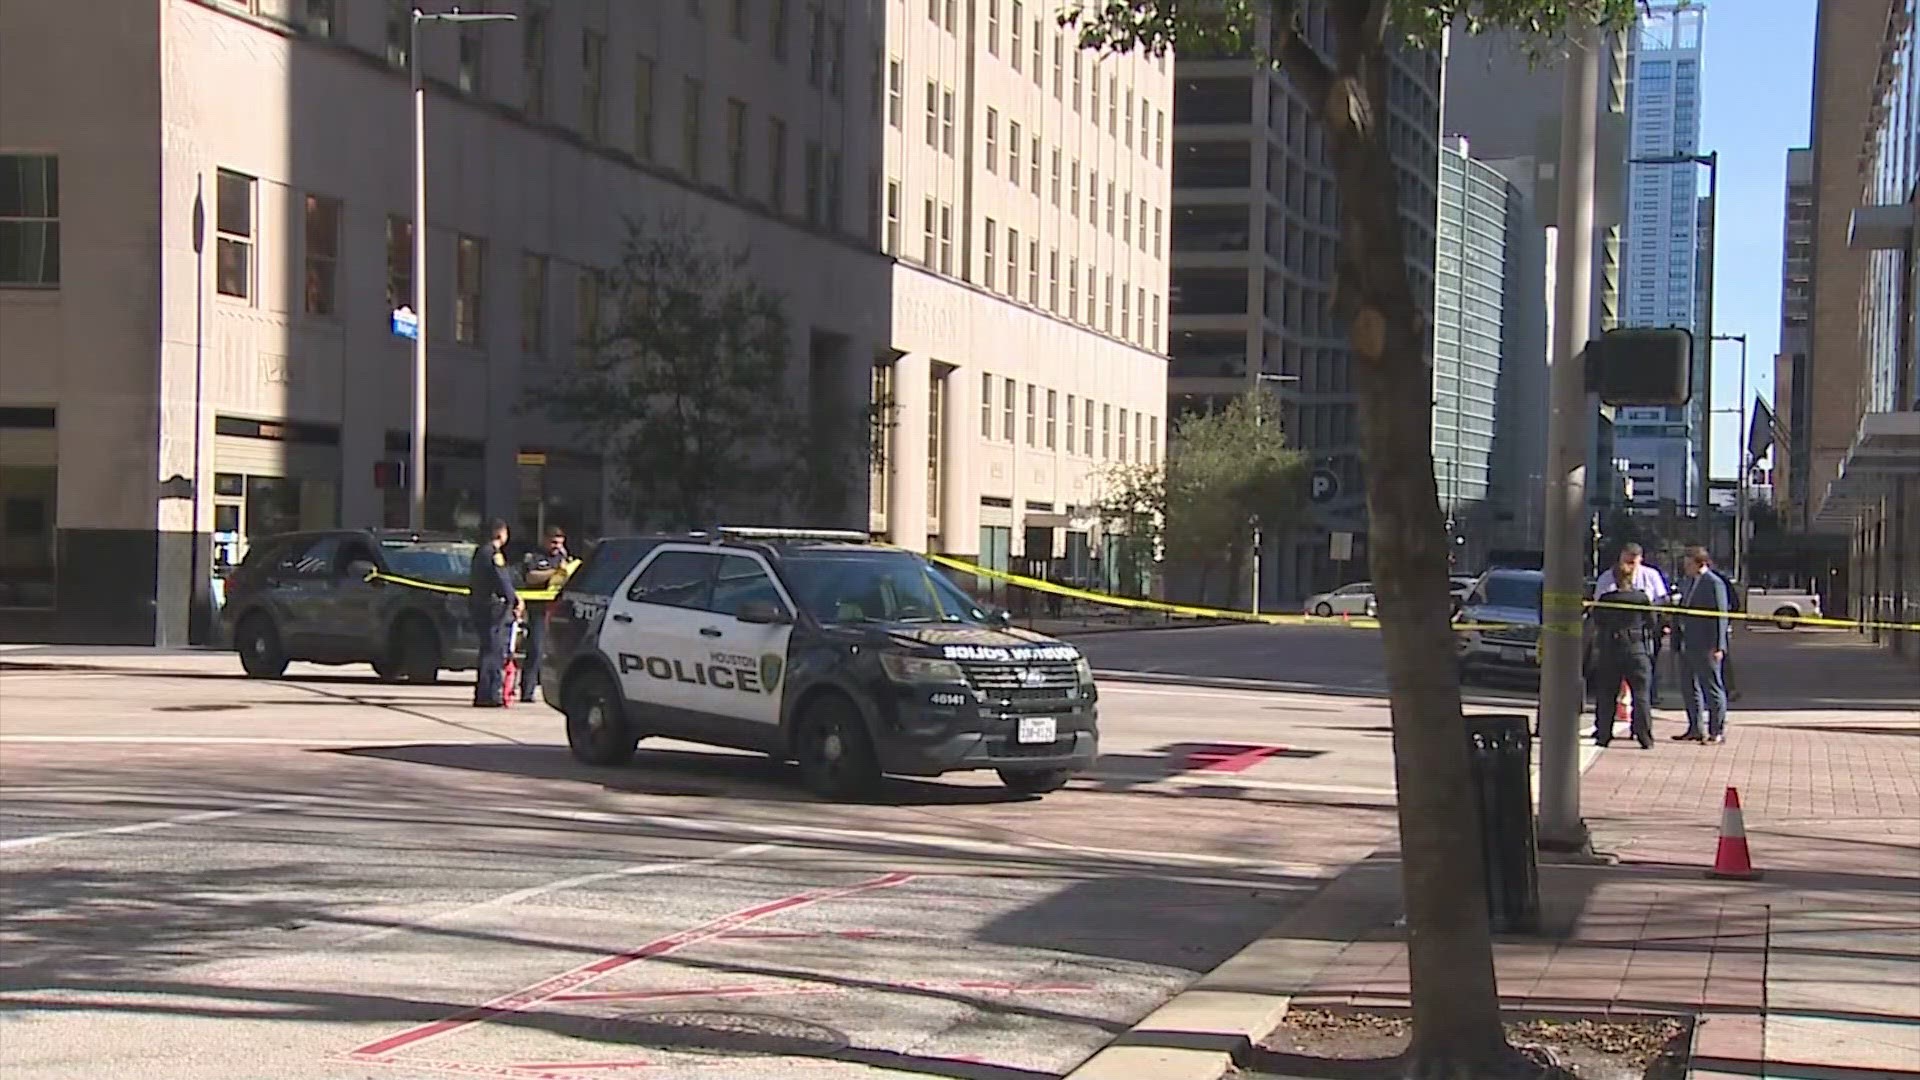 The victim was walking near the intersection of Milam and Walker when she was hit by a white pickup truck, Houston police said.